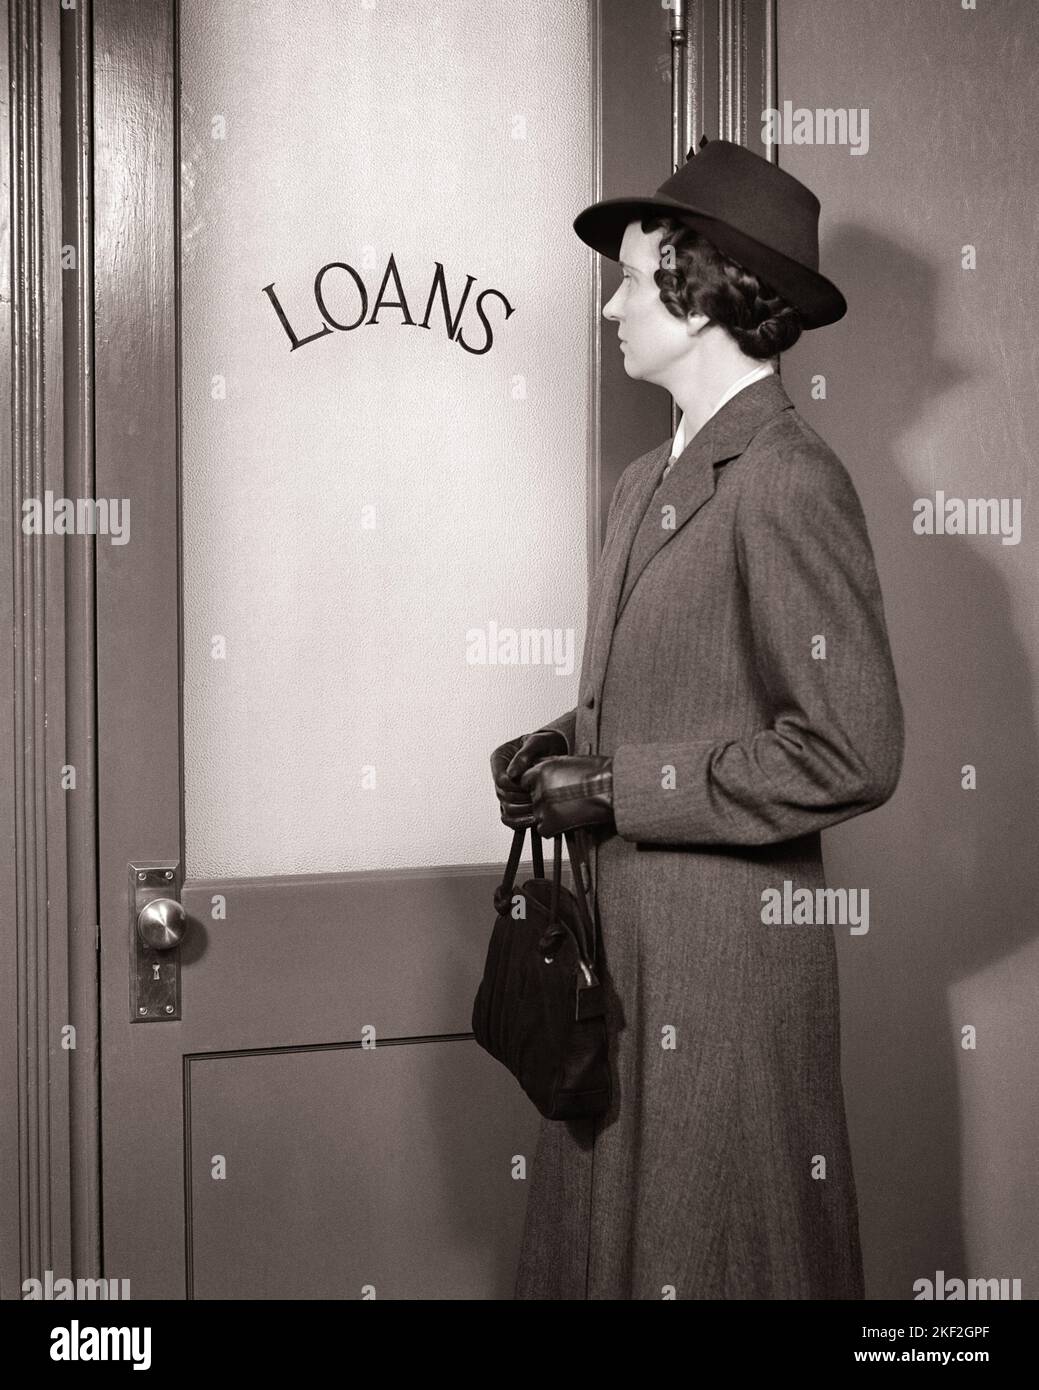 1930s WOMAN STANDING IN FRONT OF DOOR TO LOAN LOANS OFFICE WEARING HAT COAT GLOVES AND CLUTCHING HER HANDBAG - s4410 HAR001 HARS ANGER FEAR DEBT WORRY LIFESTYLE FEMALES PROUD STUDIO SHOT MOODY FINANCES COPY SPACE HALF-LENGTH LADIES PERSONS BANKING BANKER TROUBLED B&W CONCERNED FINANCIAL SADNESS LOAN STYLES AND PRIDE HARDSHIP MOOD CONCEPTUAL GLUM EMBARRASSMENT STYLISH SUPPORT IN FRONT OF FASHIONS IDEAS MID-ADULT MID-ADULT WOMAN MISERABLE NEED SOLUTIONS BLACK AND WHITE CAUCASIAN ETHNICITY CLUTCHING HAR001 LOANS OLD FASHIONED Stock Photo